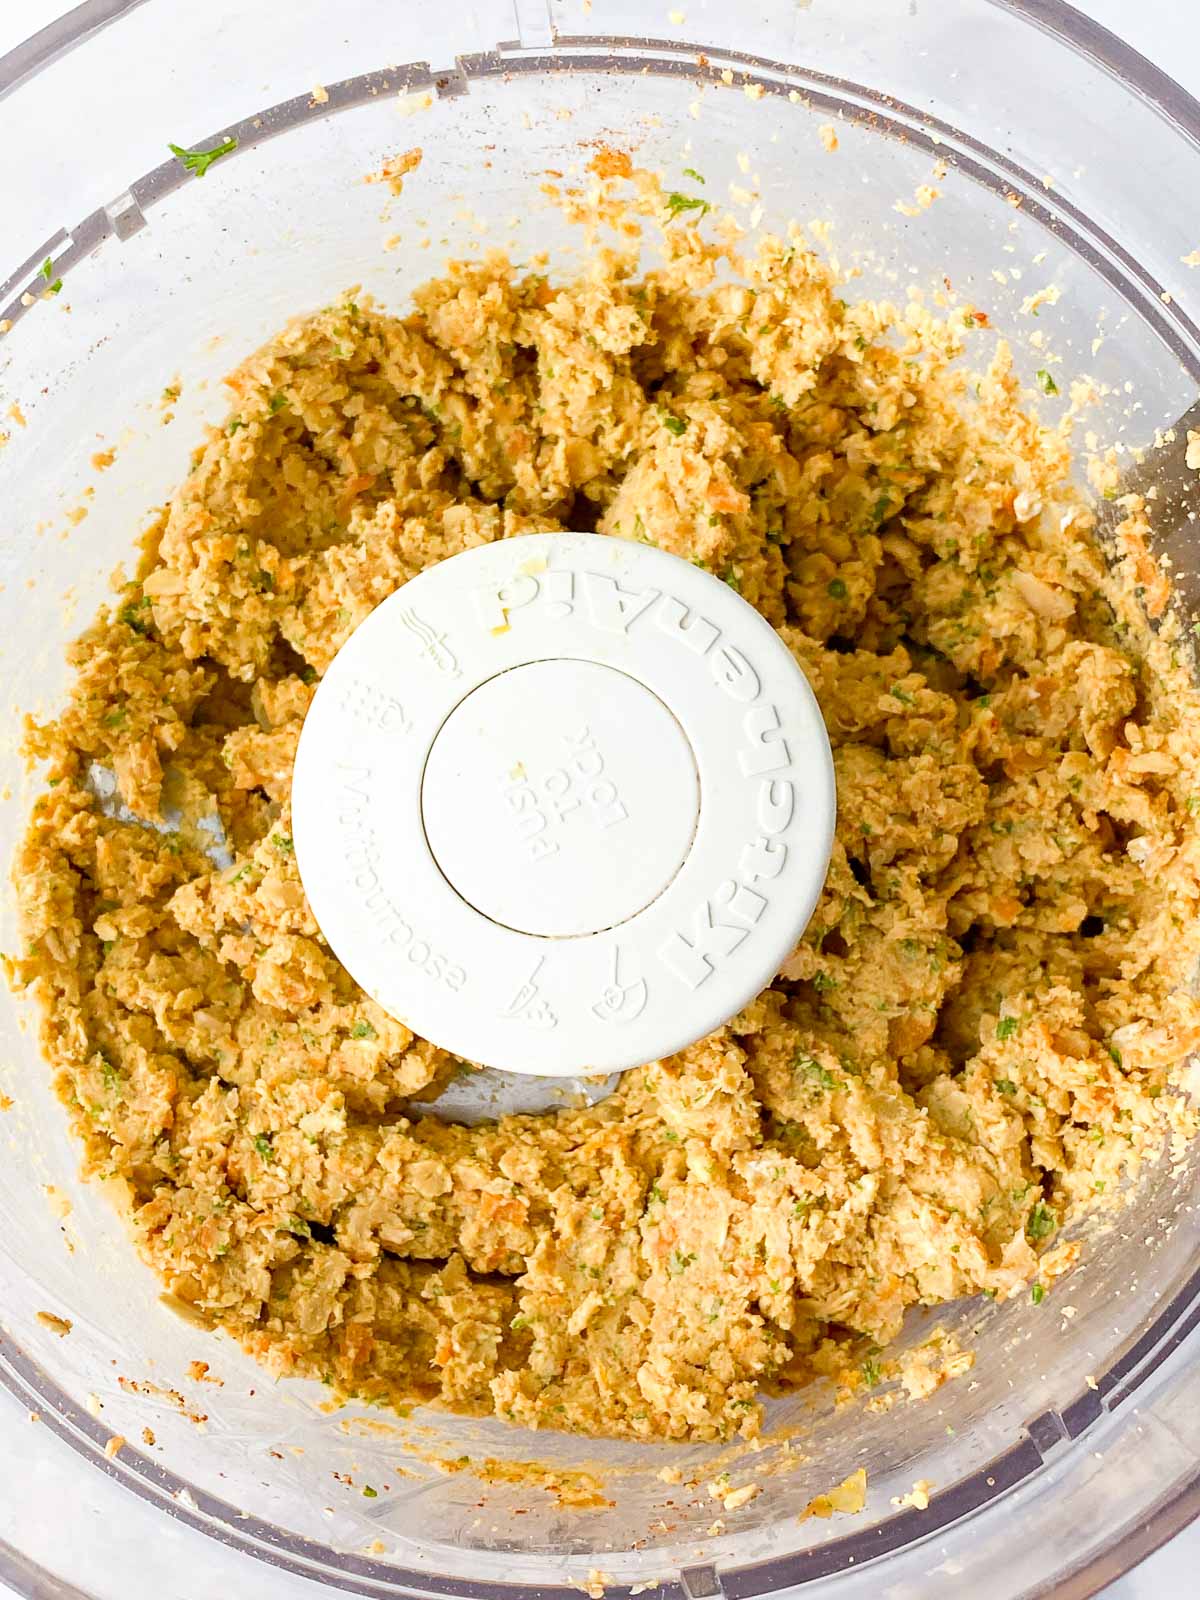 Chickpea burger ingredients blended in a food processor.